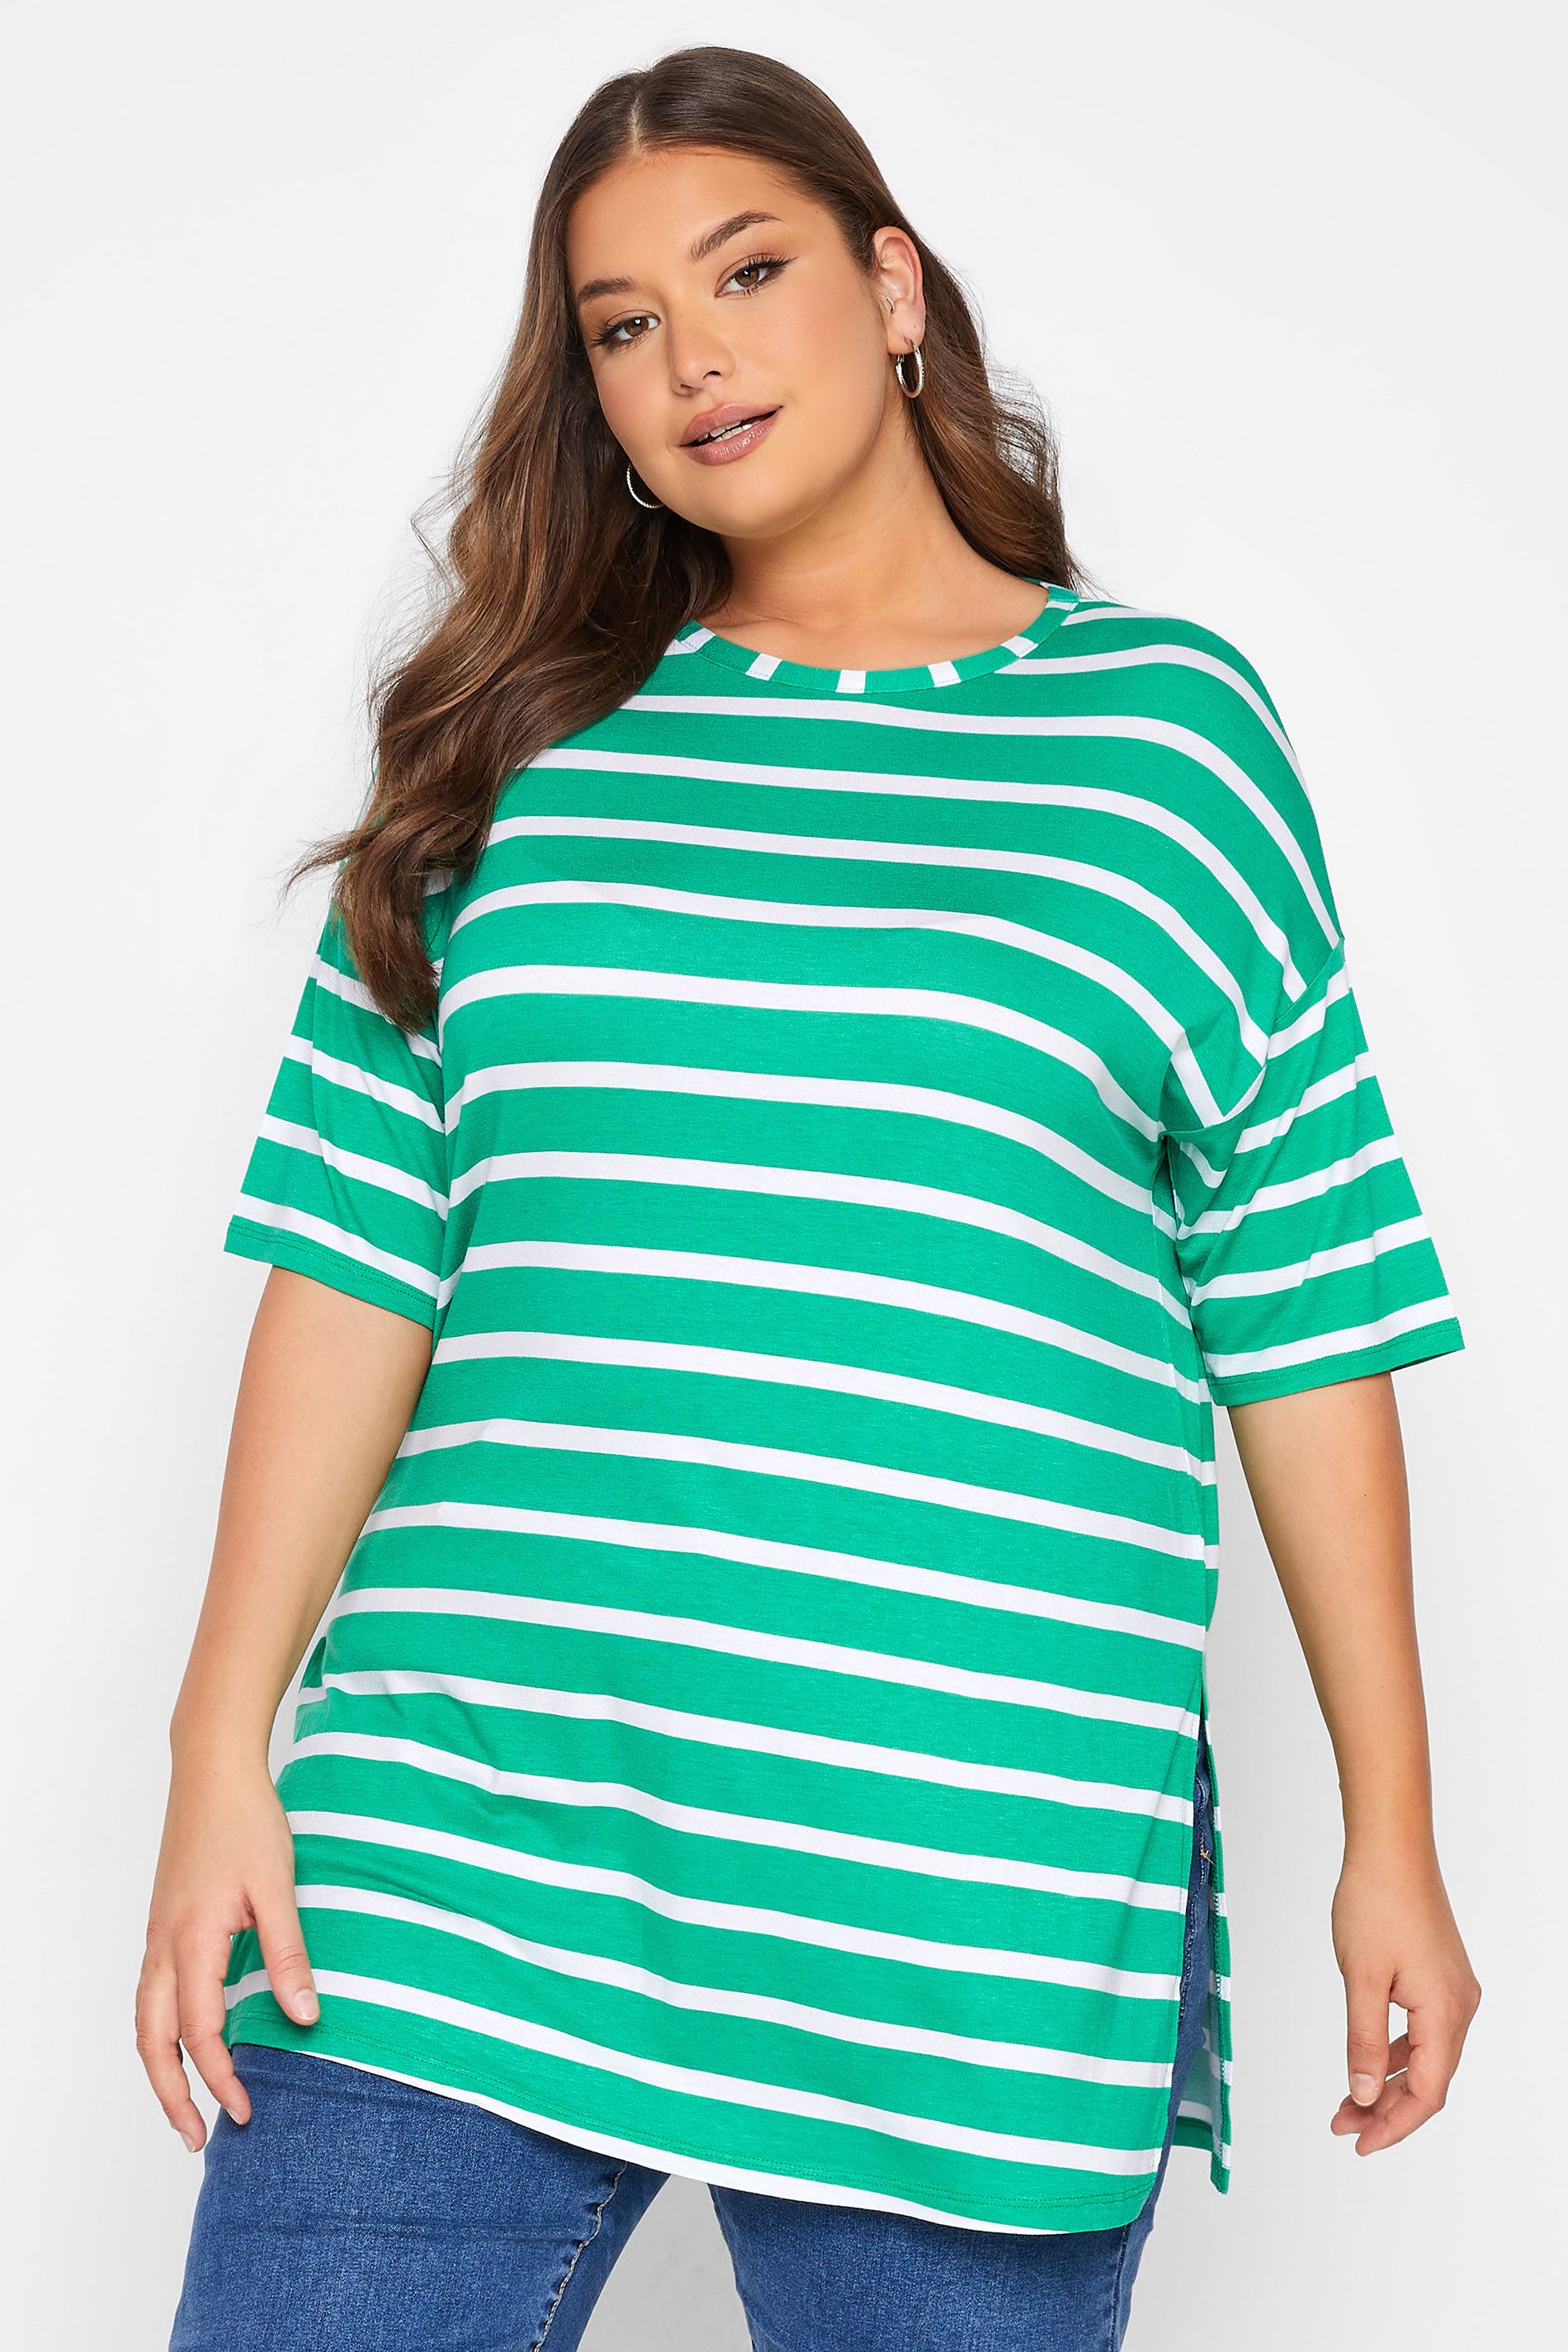 Grande taille  Tops Grande taille  Tops Casual | T-Shirt Oversize Vert & Blanc à Rayures - GH40753